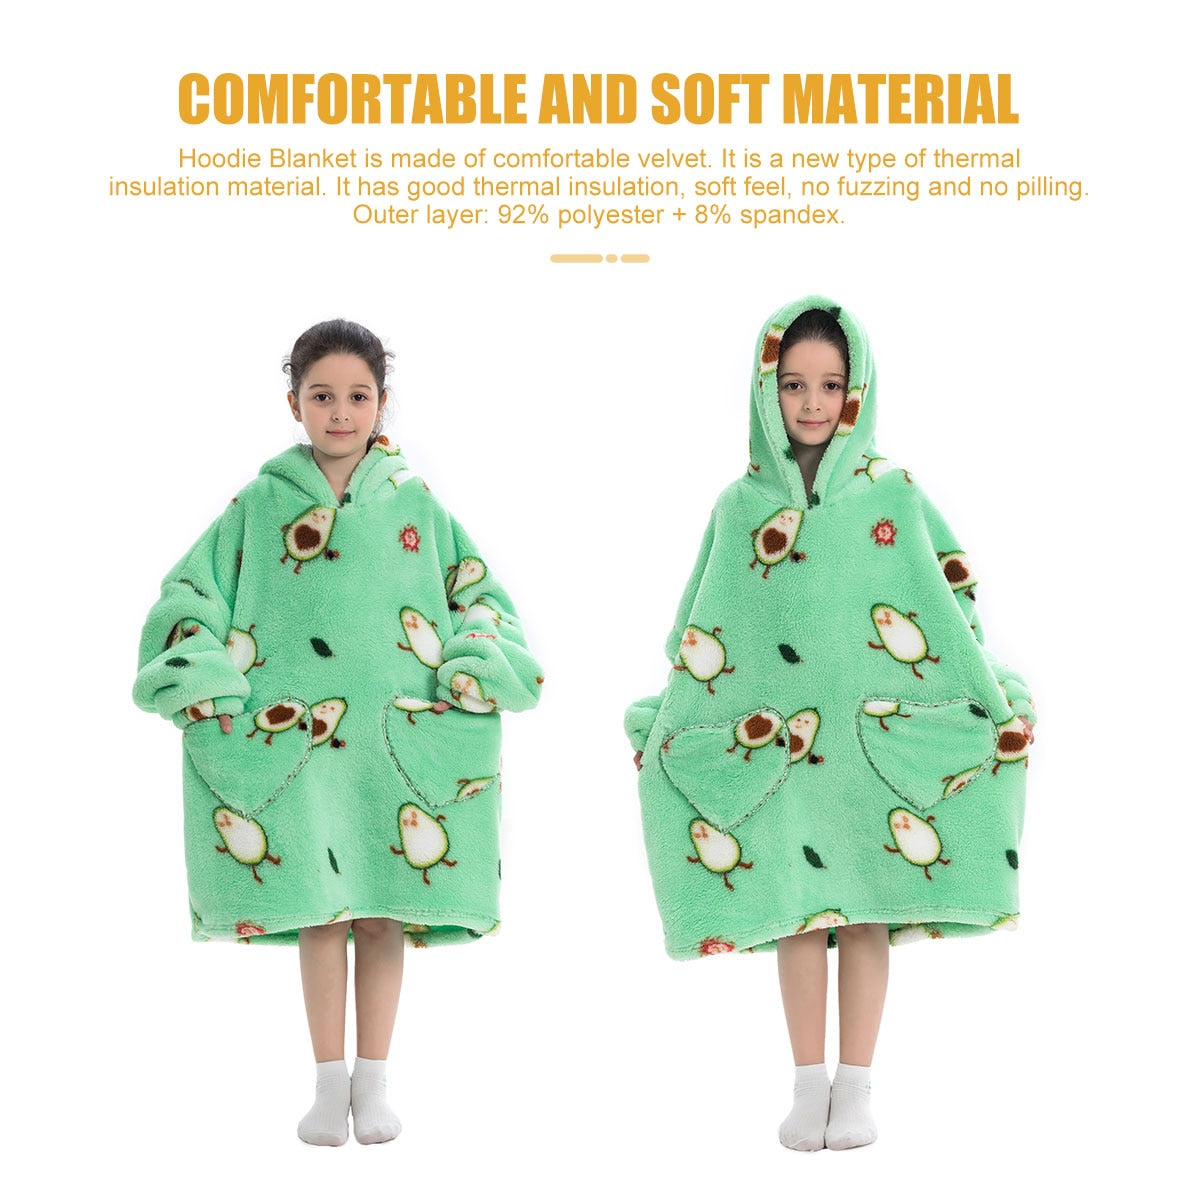 Oversized Hooded Blanket for Adult Child Wearable Blankets for Winter Warm Outdoor Hoodie Sweatshirt The Clothing Company Sydney